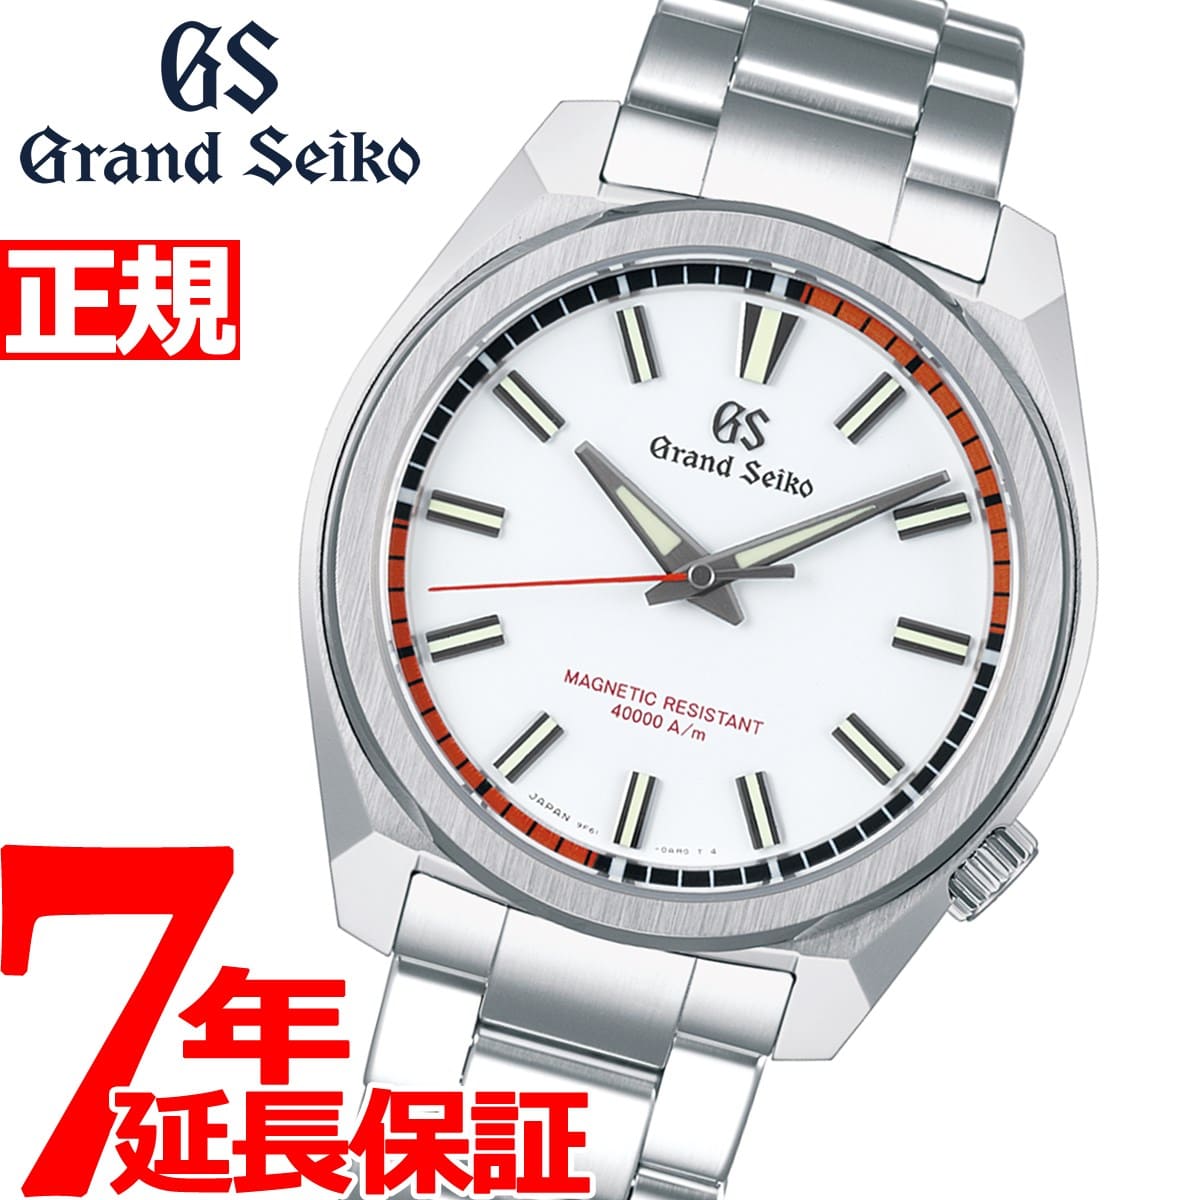 New]0:00 ...! up to  times! It is ground SEIKO GRAND SEIKO collection  Sport Collection kyokataiji model mens SBGX341 2020 latest until 23:59 - BE  FORWARD Store